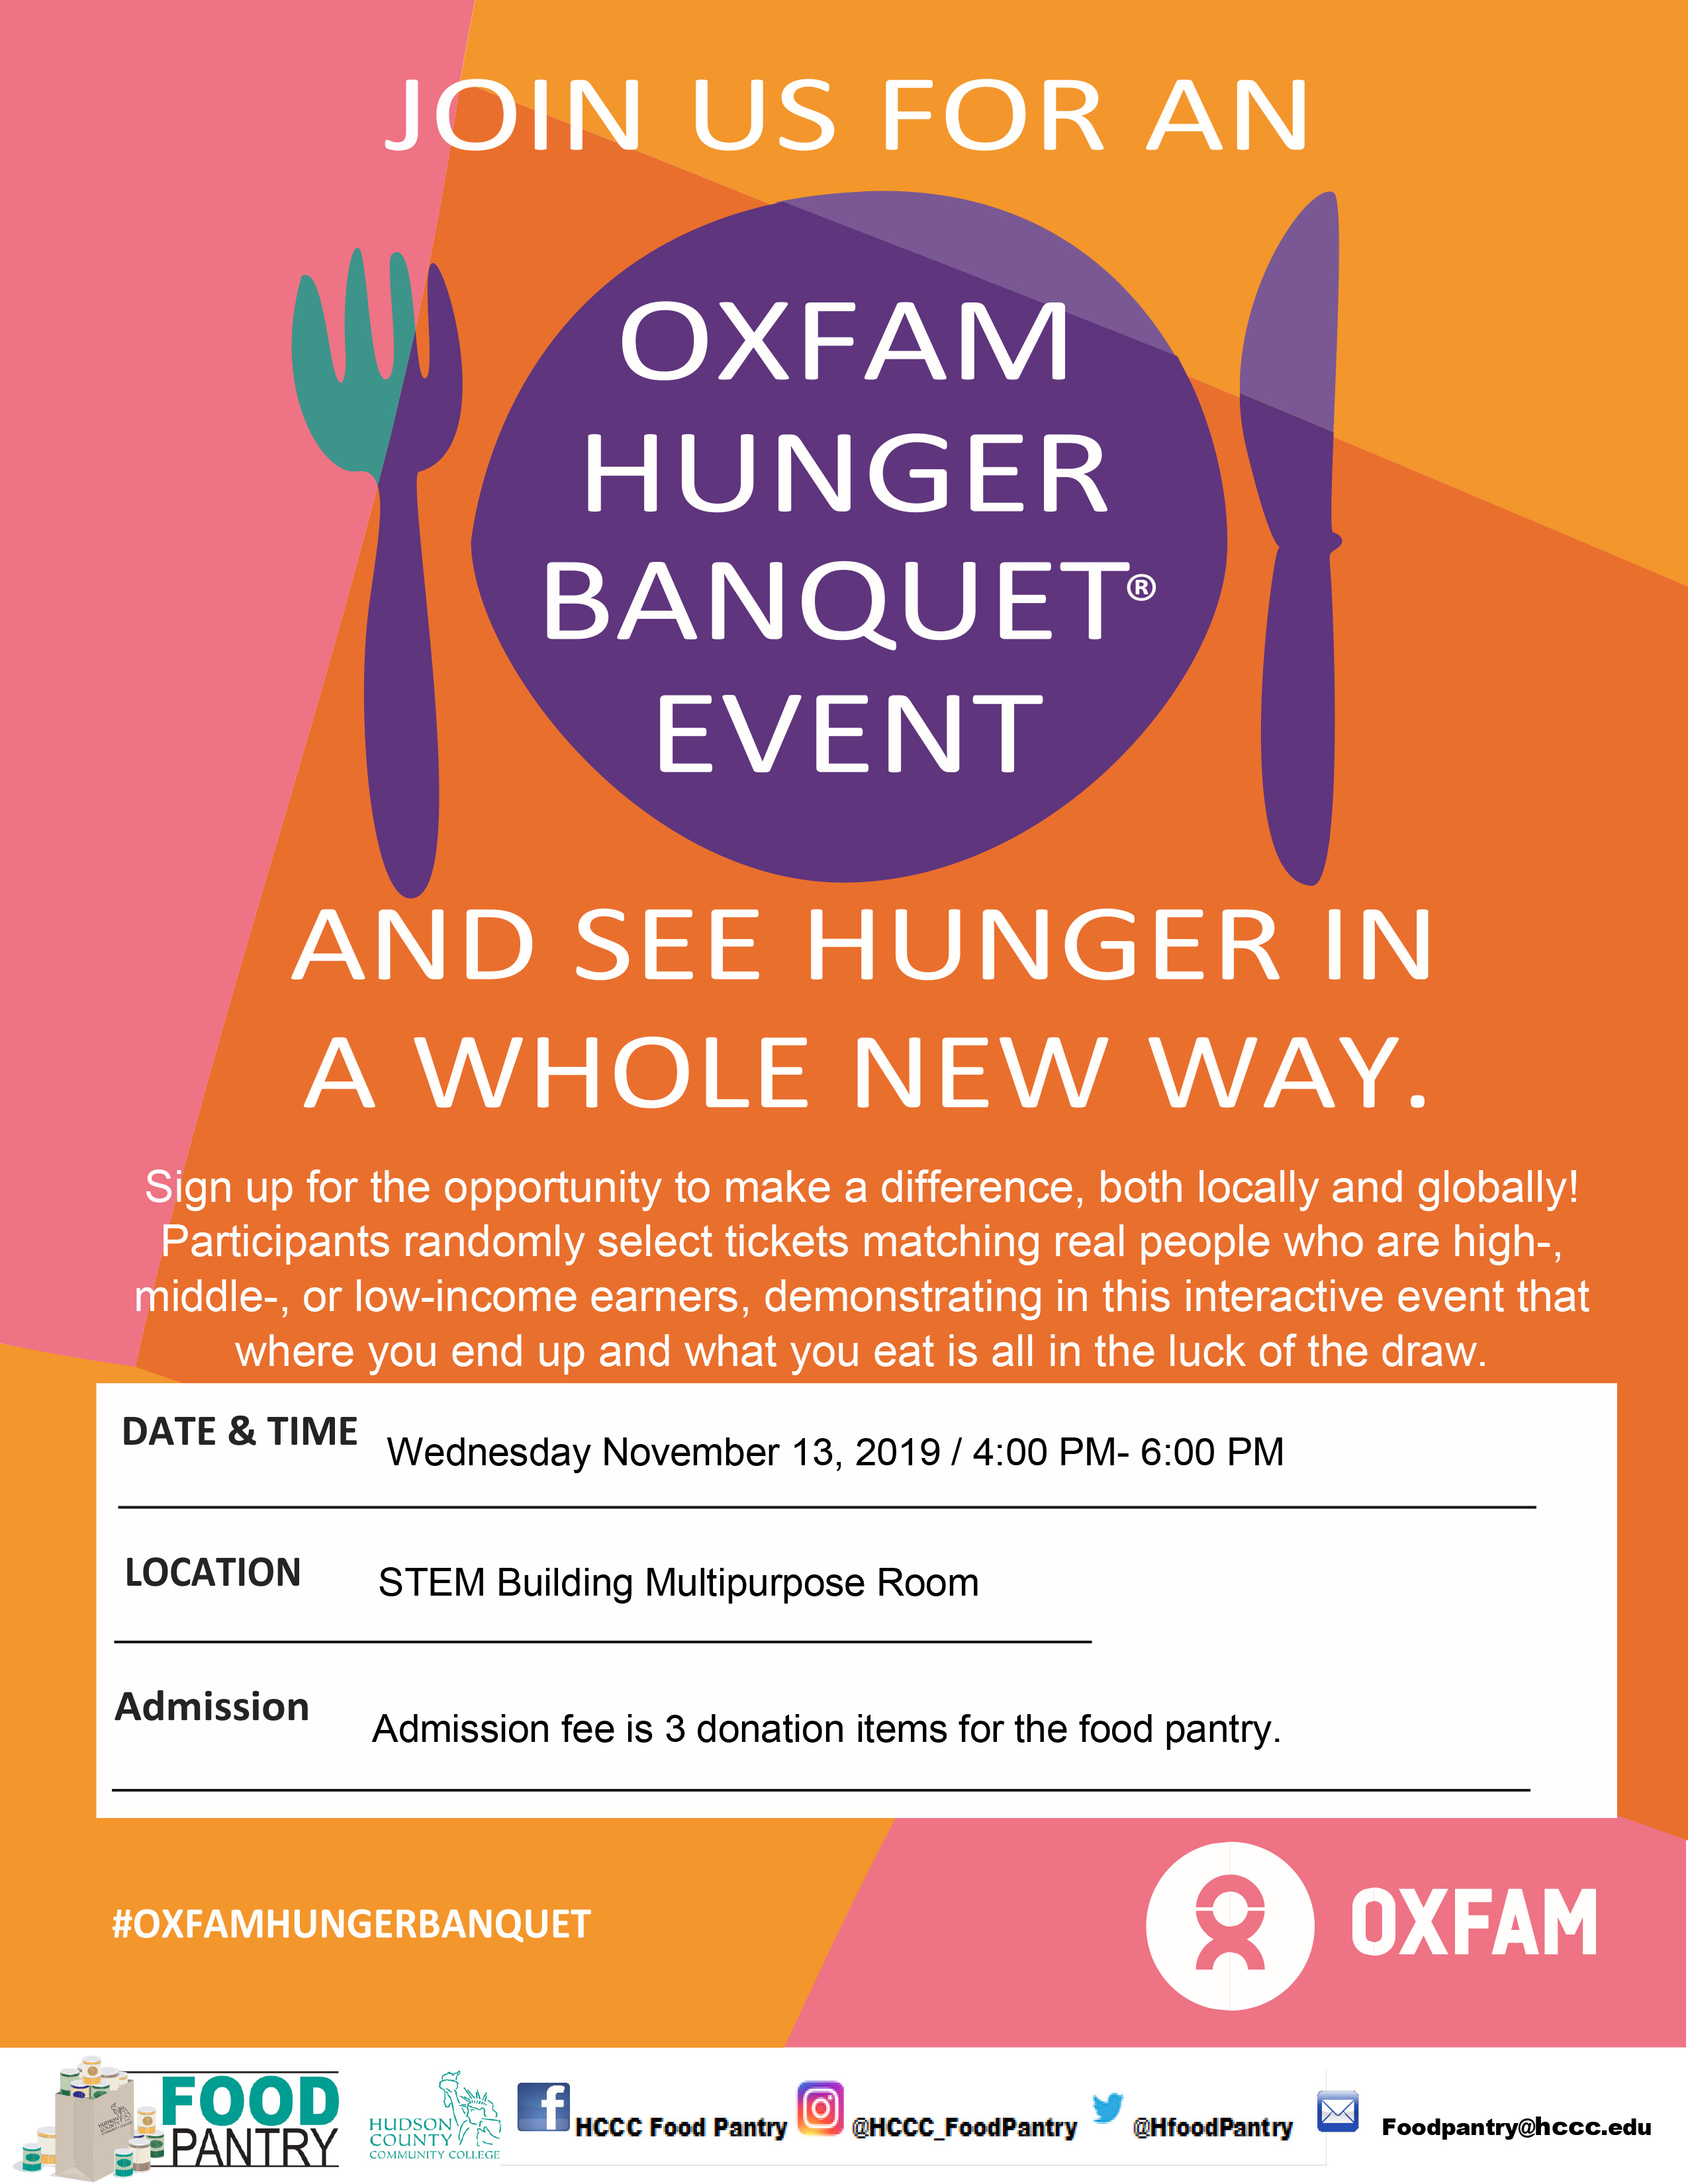 The Oxfam Hunger Banquet Event.